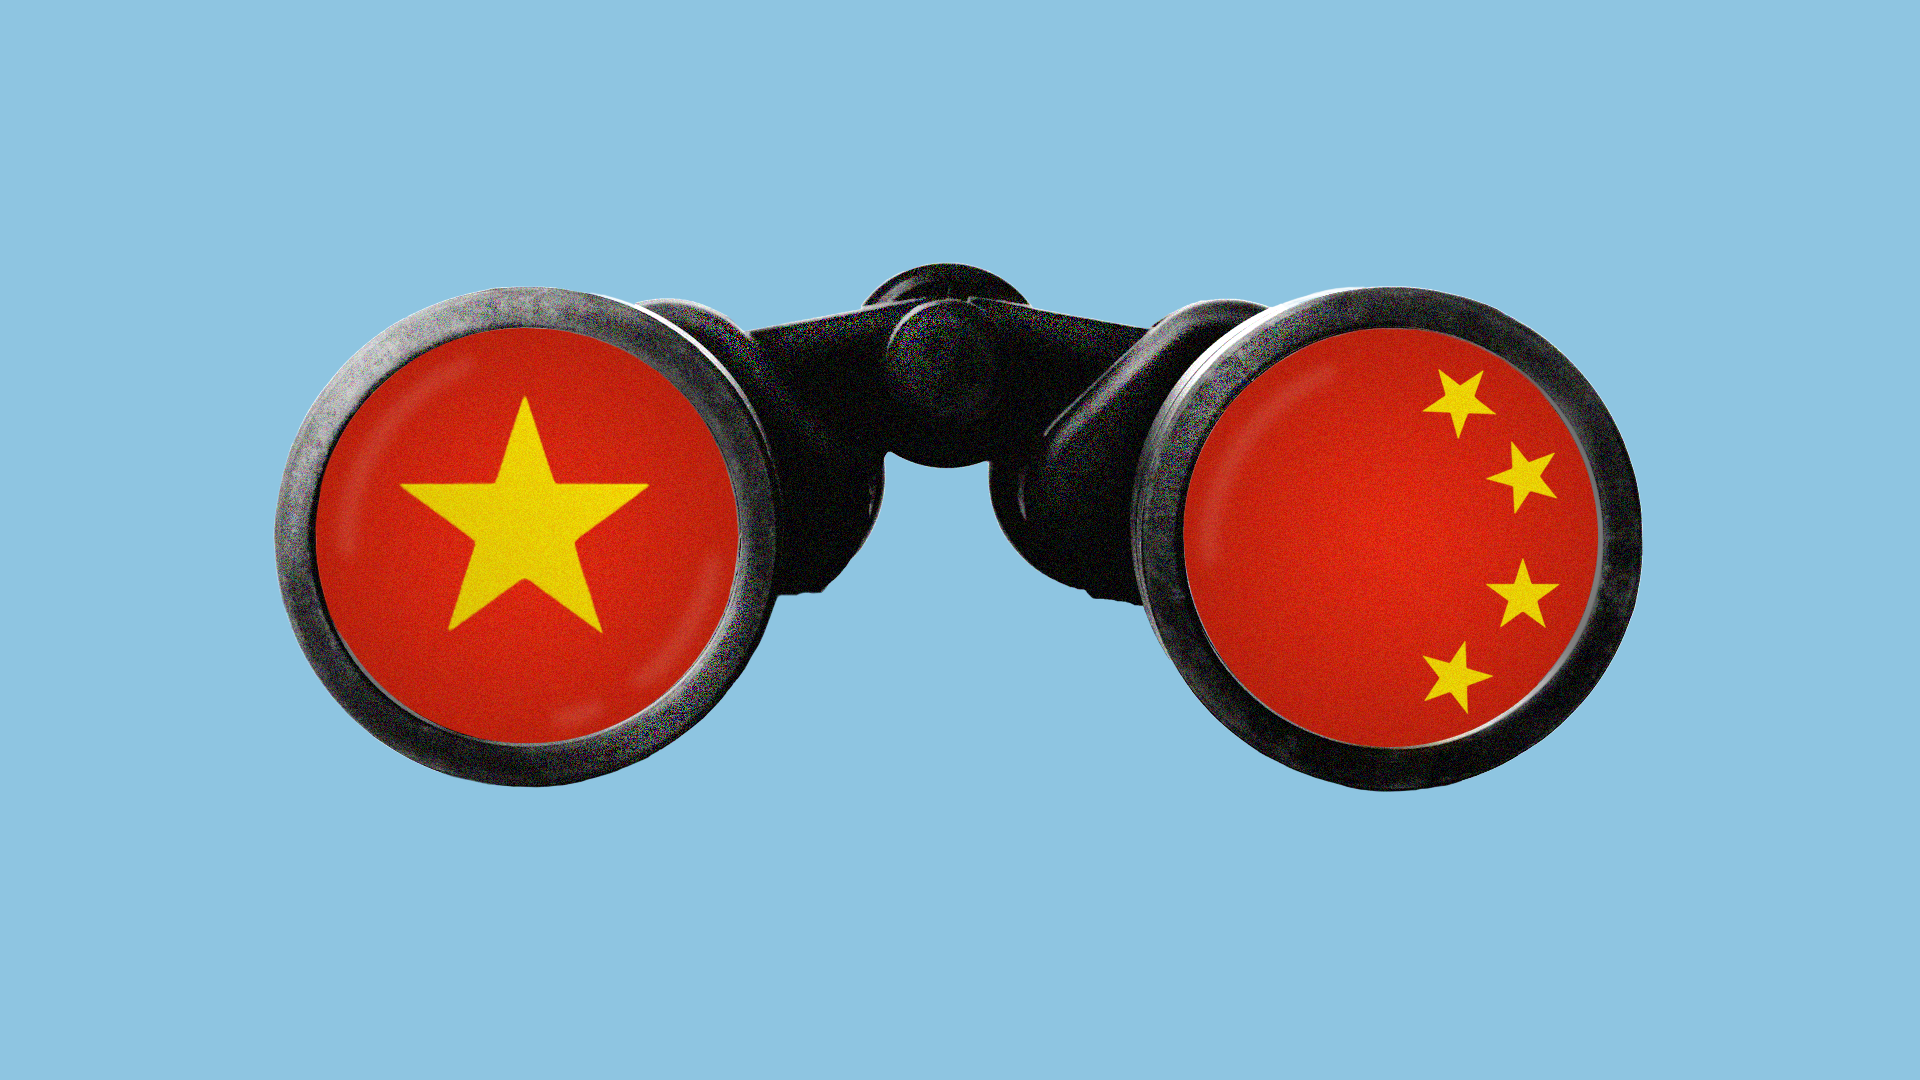 illustration of binoculars with the Chinese flag symbols in each glass piece